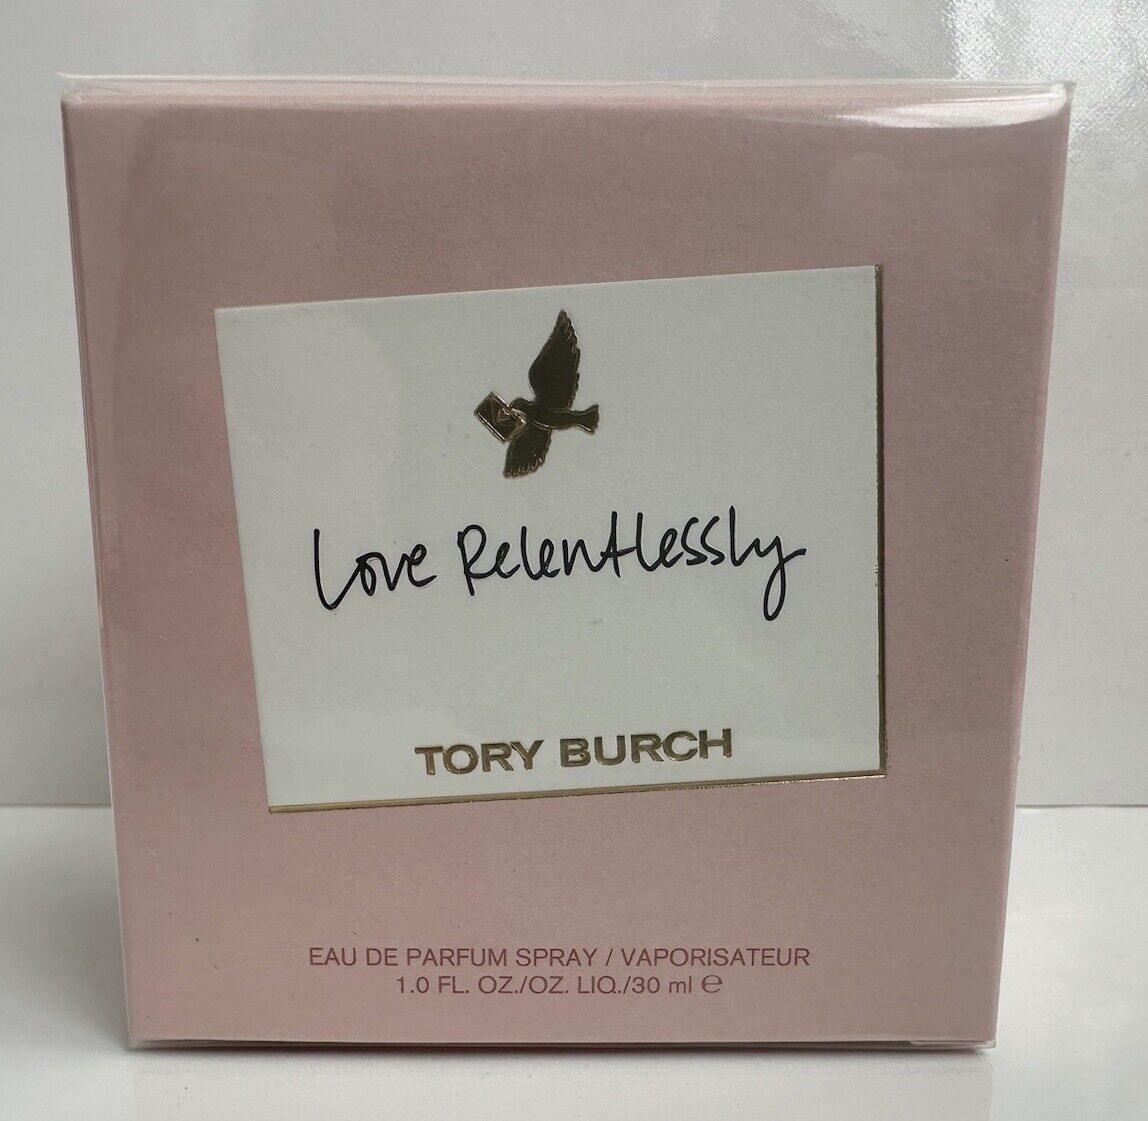 Tory Burch Love Relentlessly 1.0  Ounce EDP  Spray for women - very hard to find